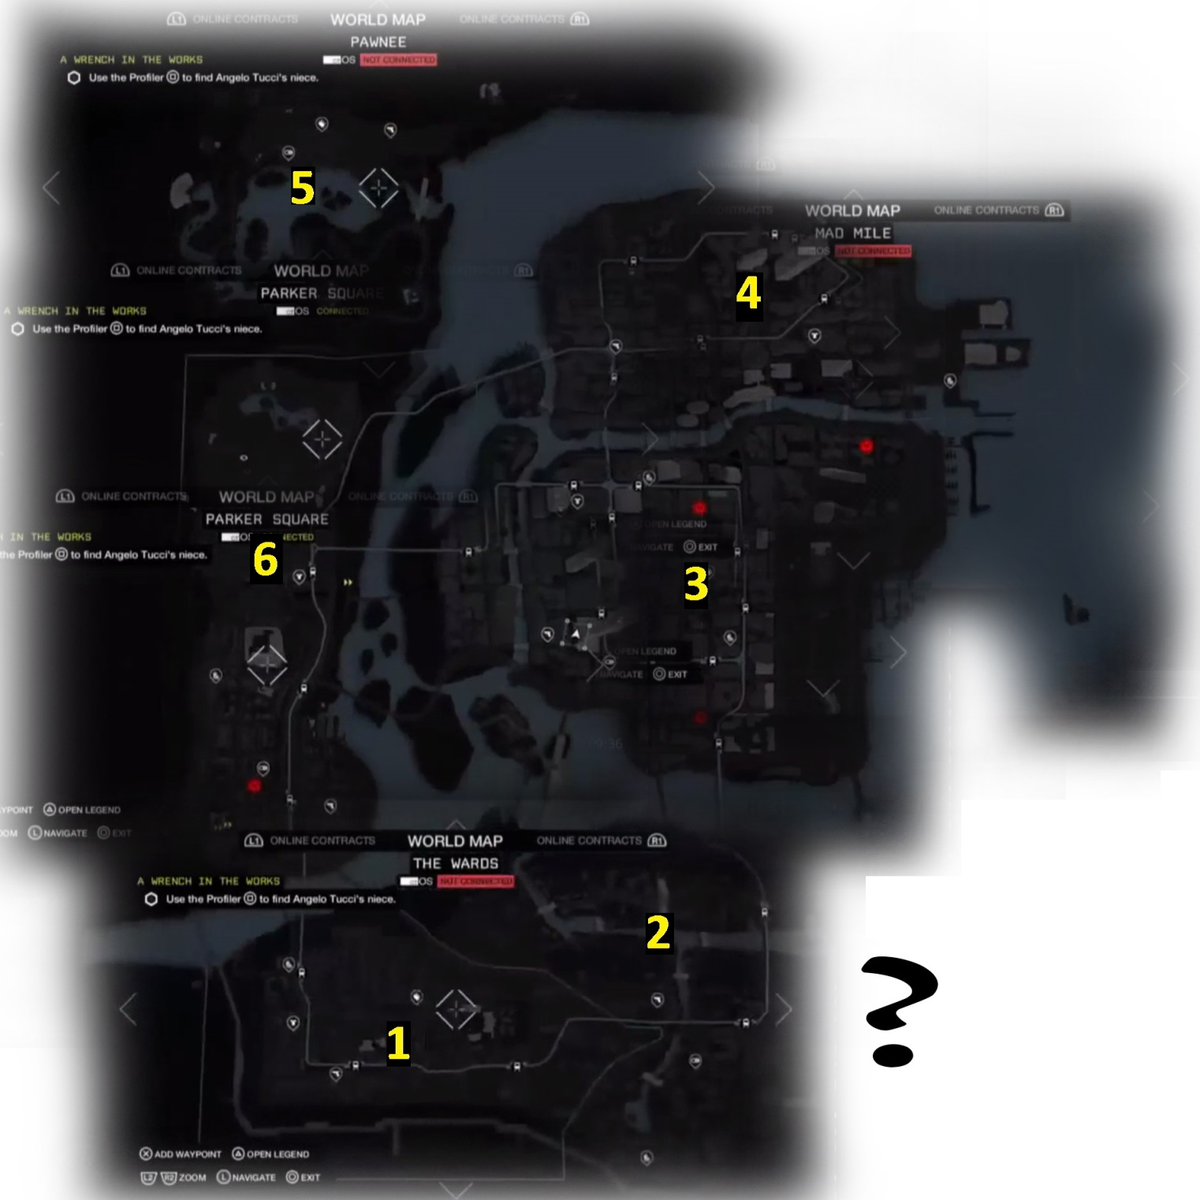 How does the Watch Dogs world map compare to GTA 5's Los Santos